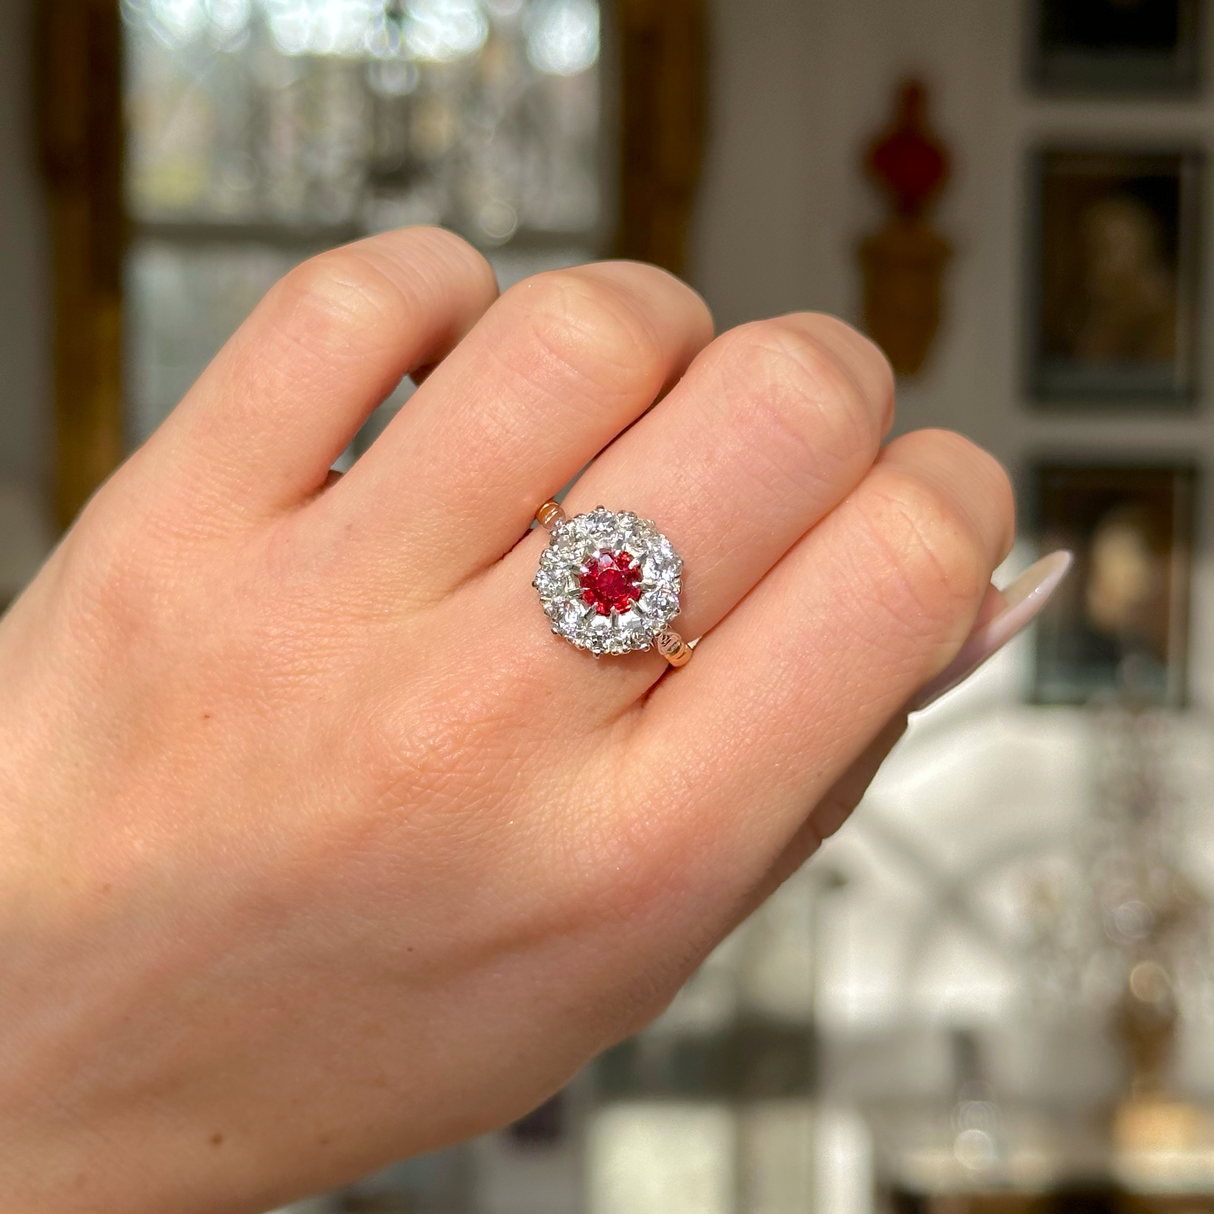 Antique victorian ruby and diamond cluster engagement ring worn on closed hand. 